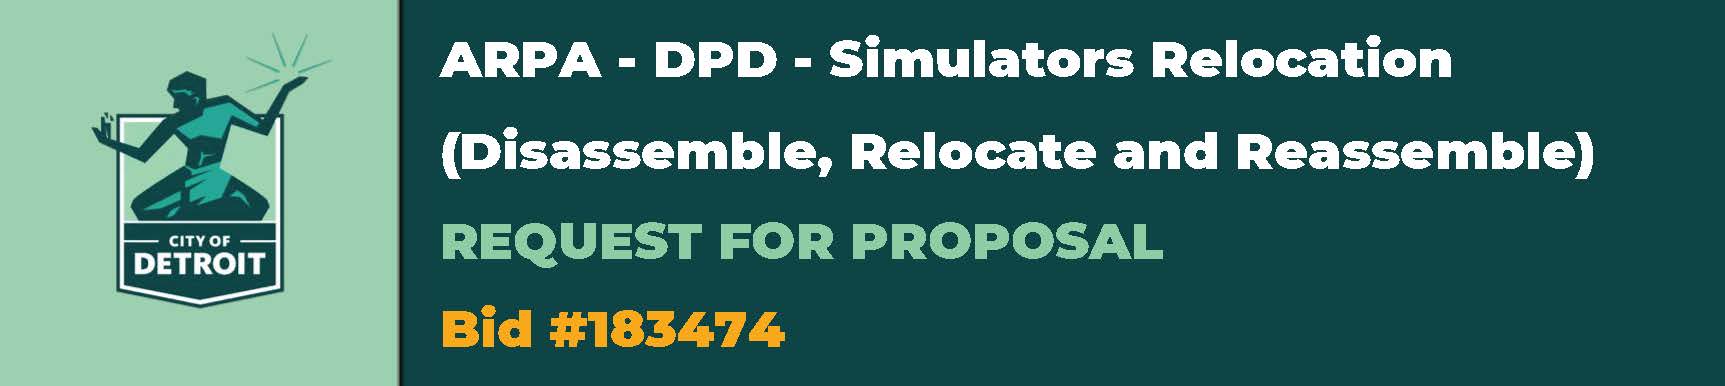 ARPA - DPD - Simulators Relocation (Disassemble, Relocate and Reassemble)